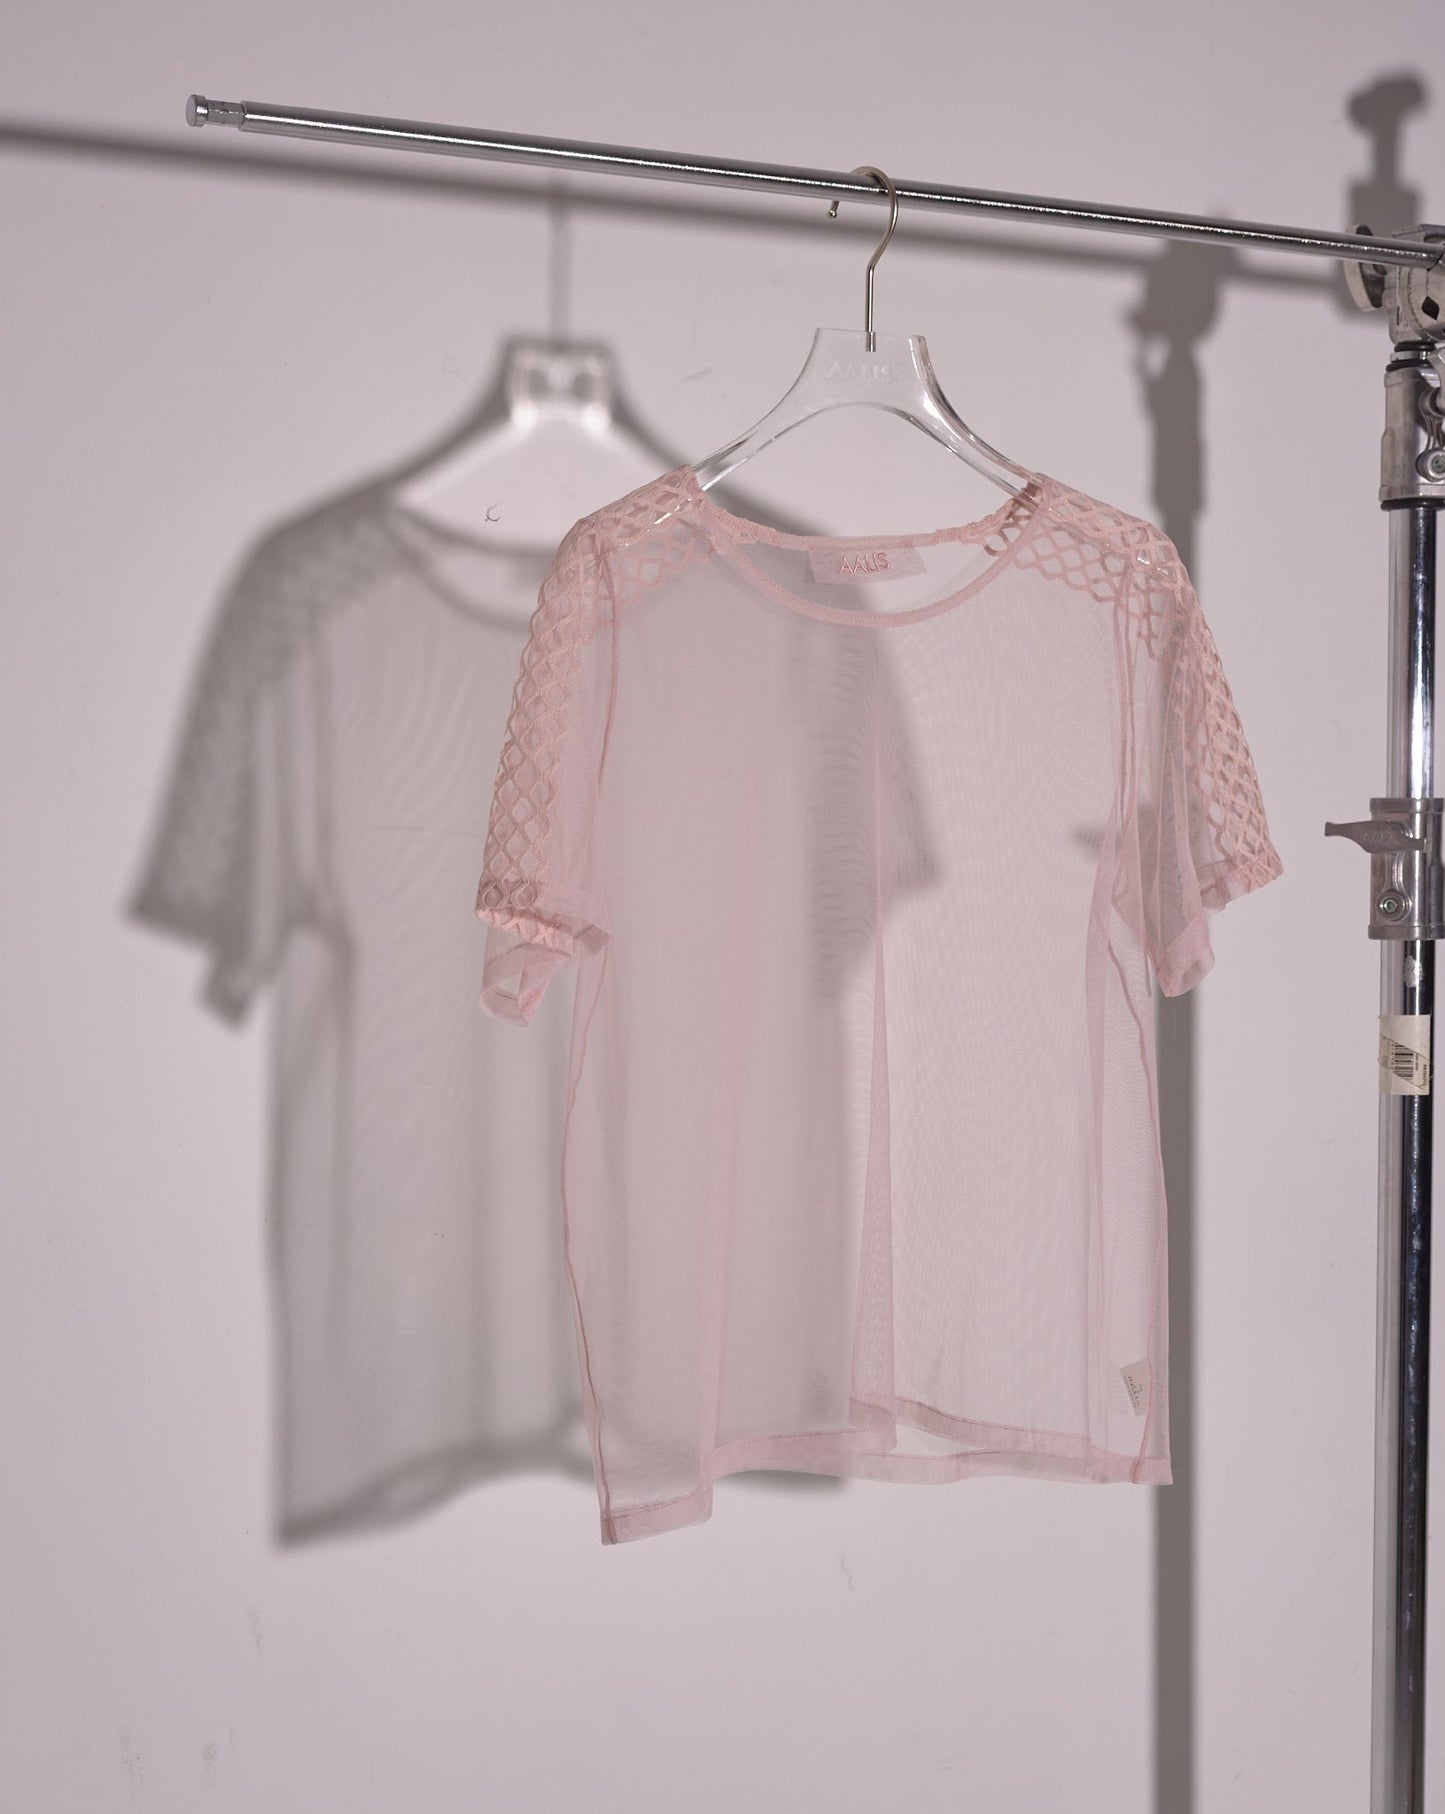 Load image into Gallery viewer, aalis CABELL Netting Trim lining Tee (Pink)
